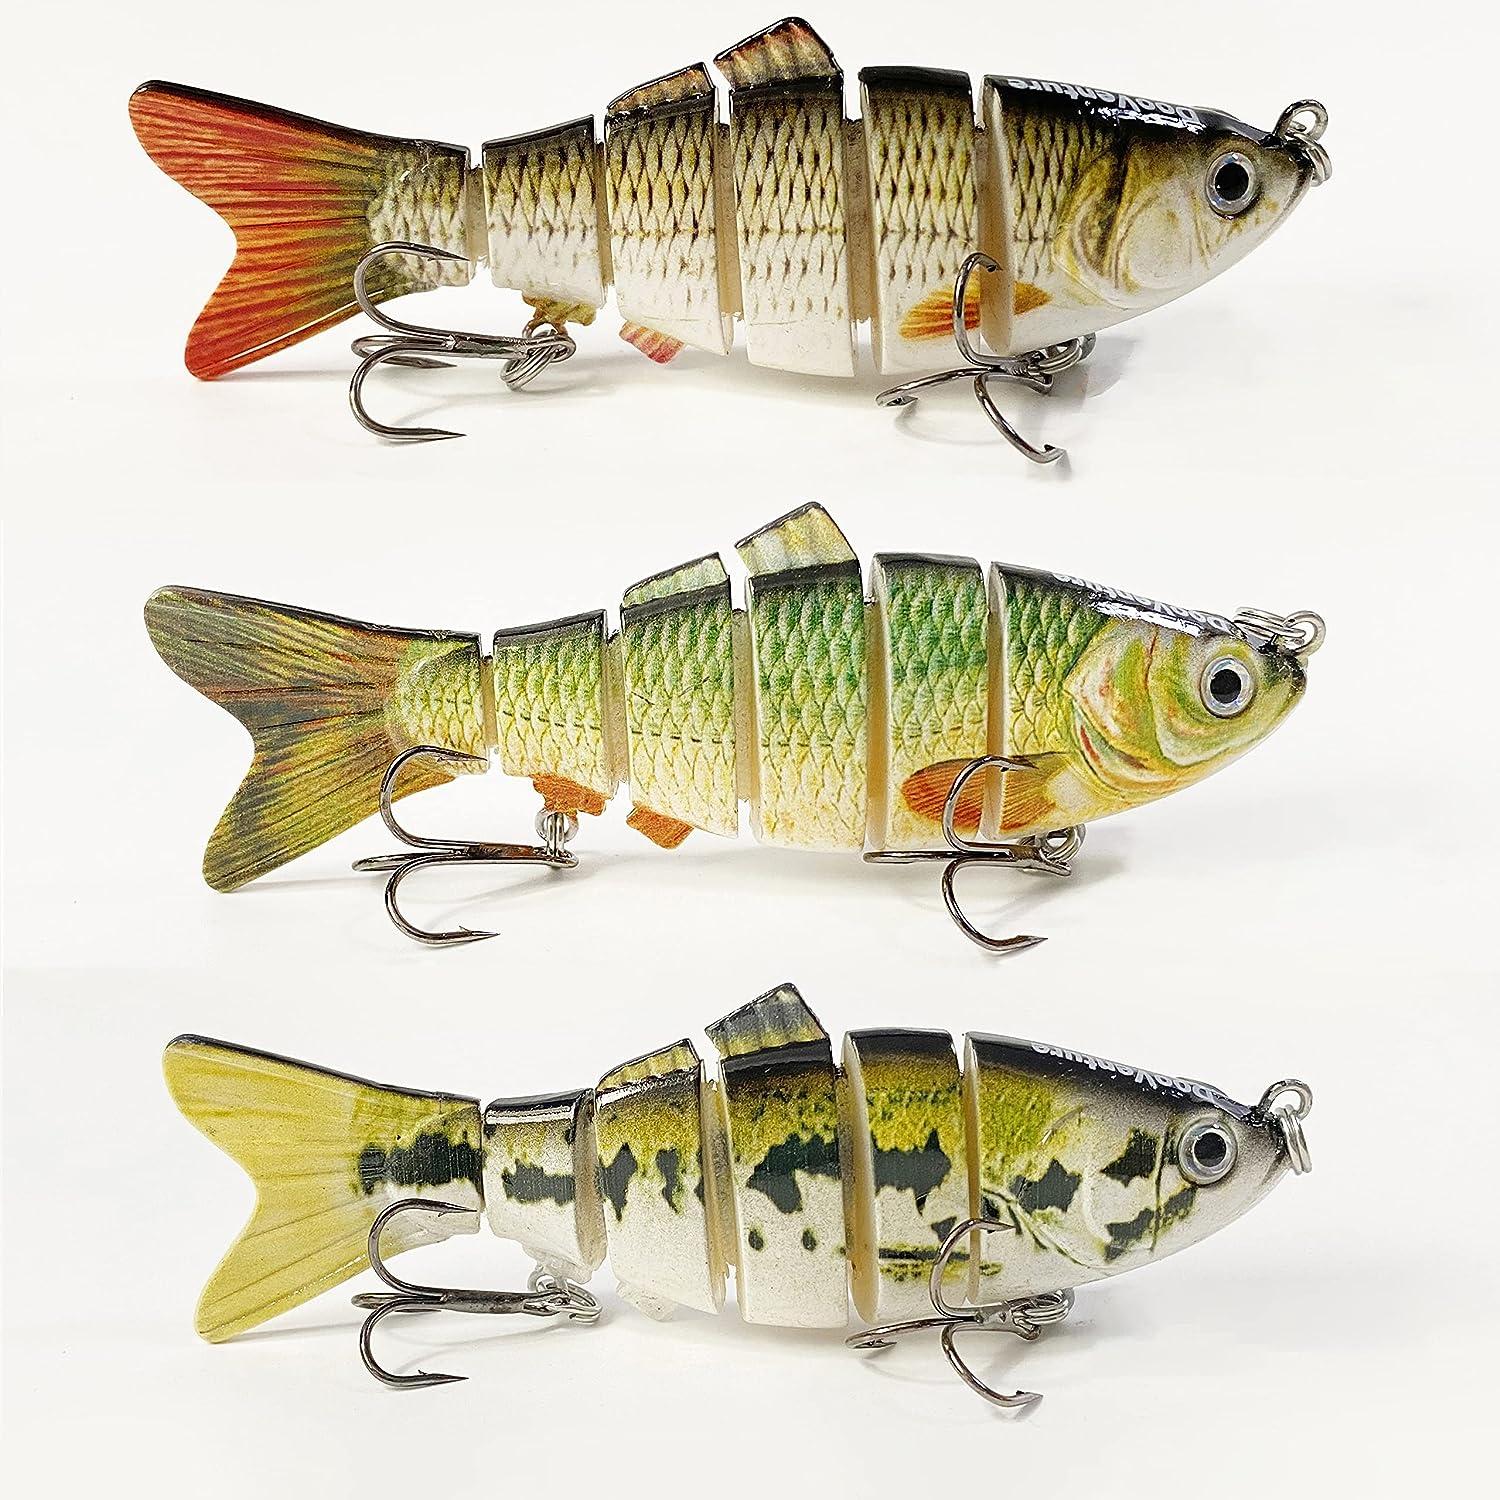 10cm 22g Sinking Wobblers 4 Segments Fishing Lures Multi Jointed